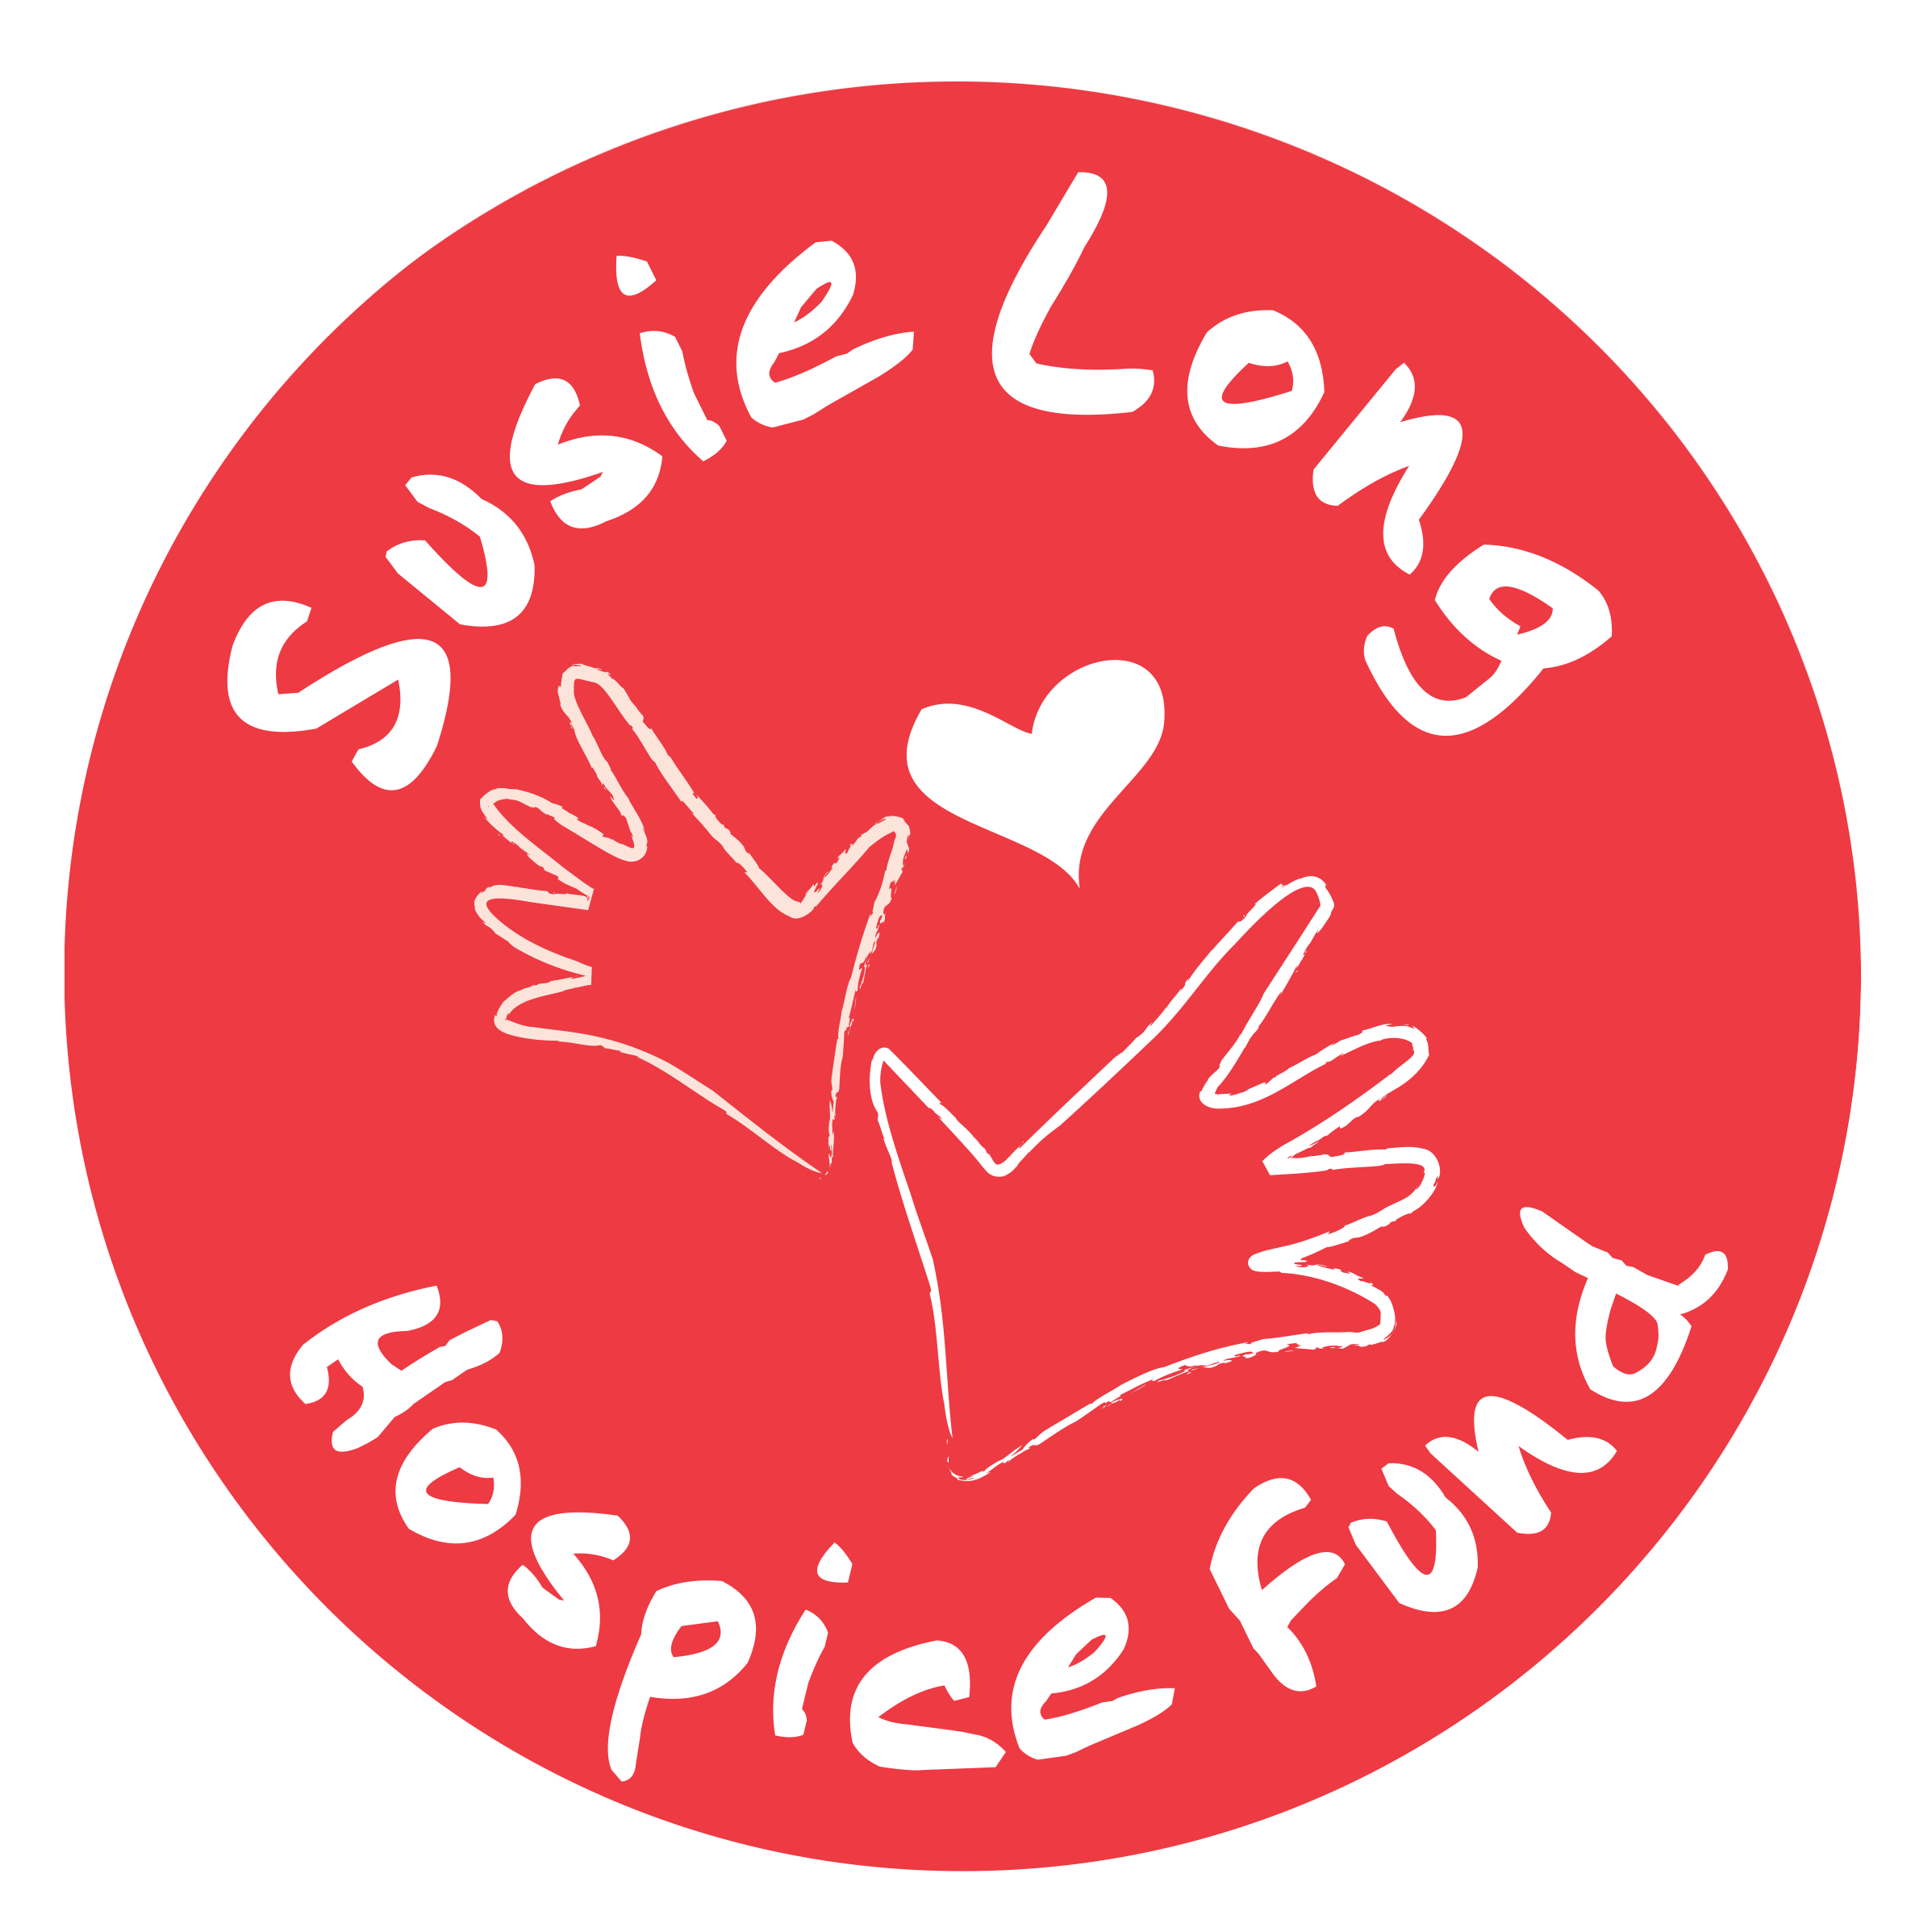 Susie Long Hospice Fund